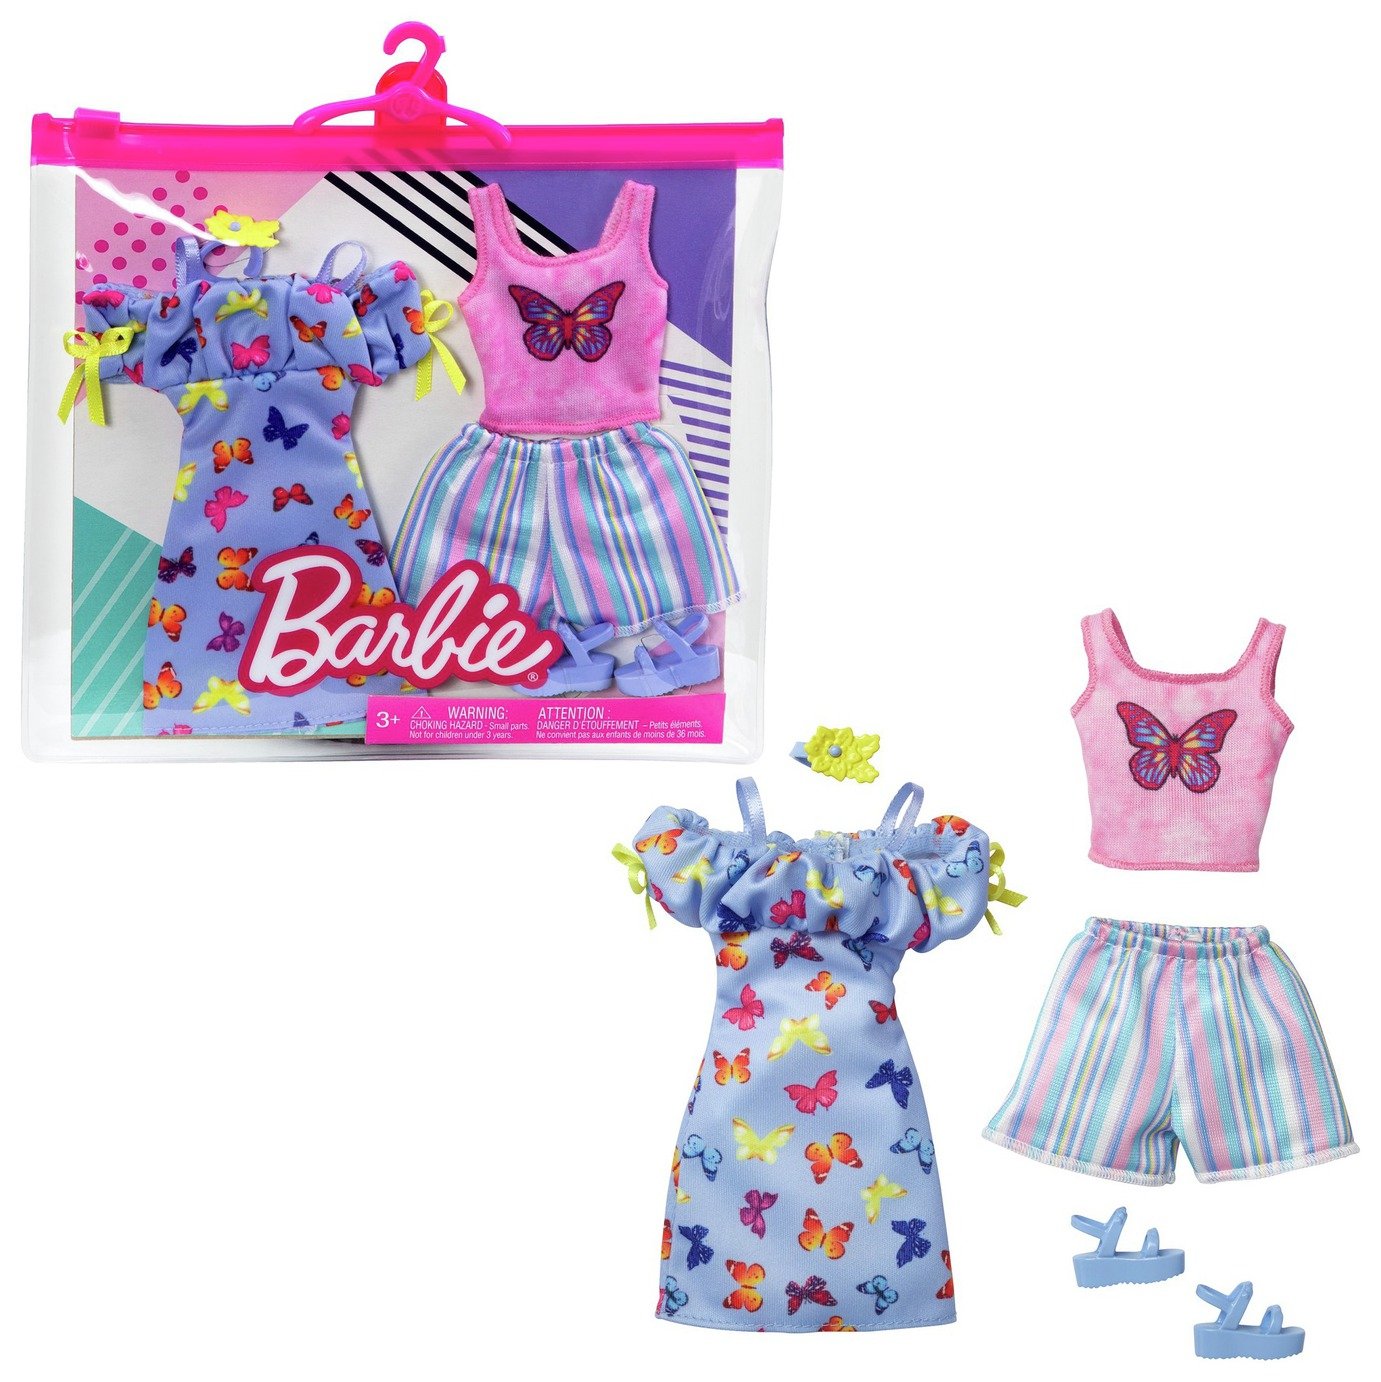 where to buy barbie clothes